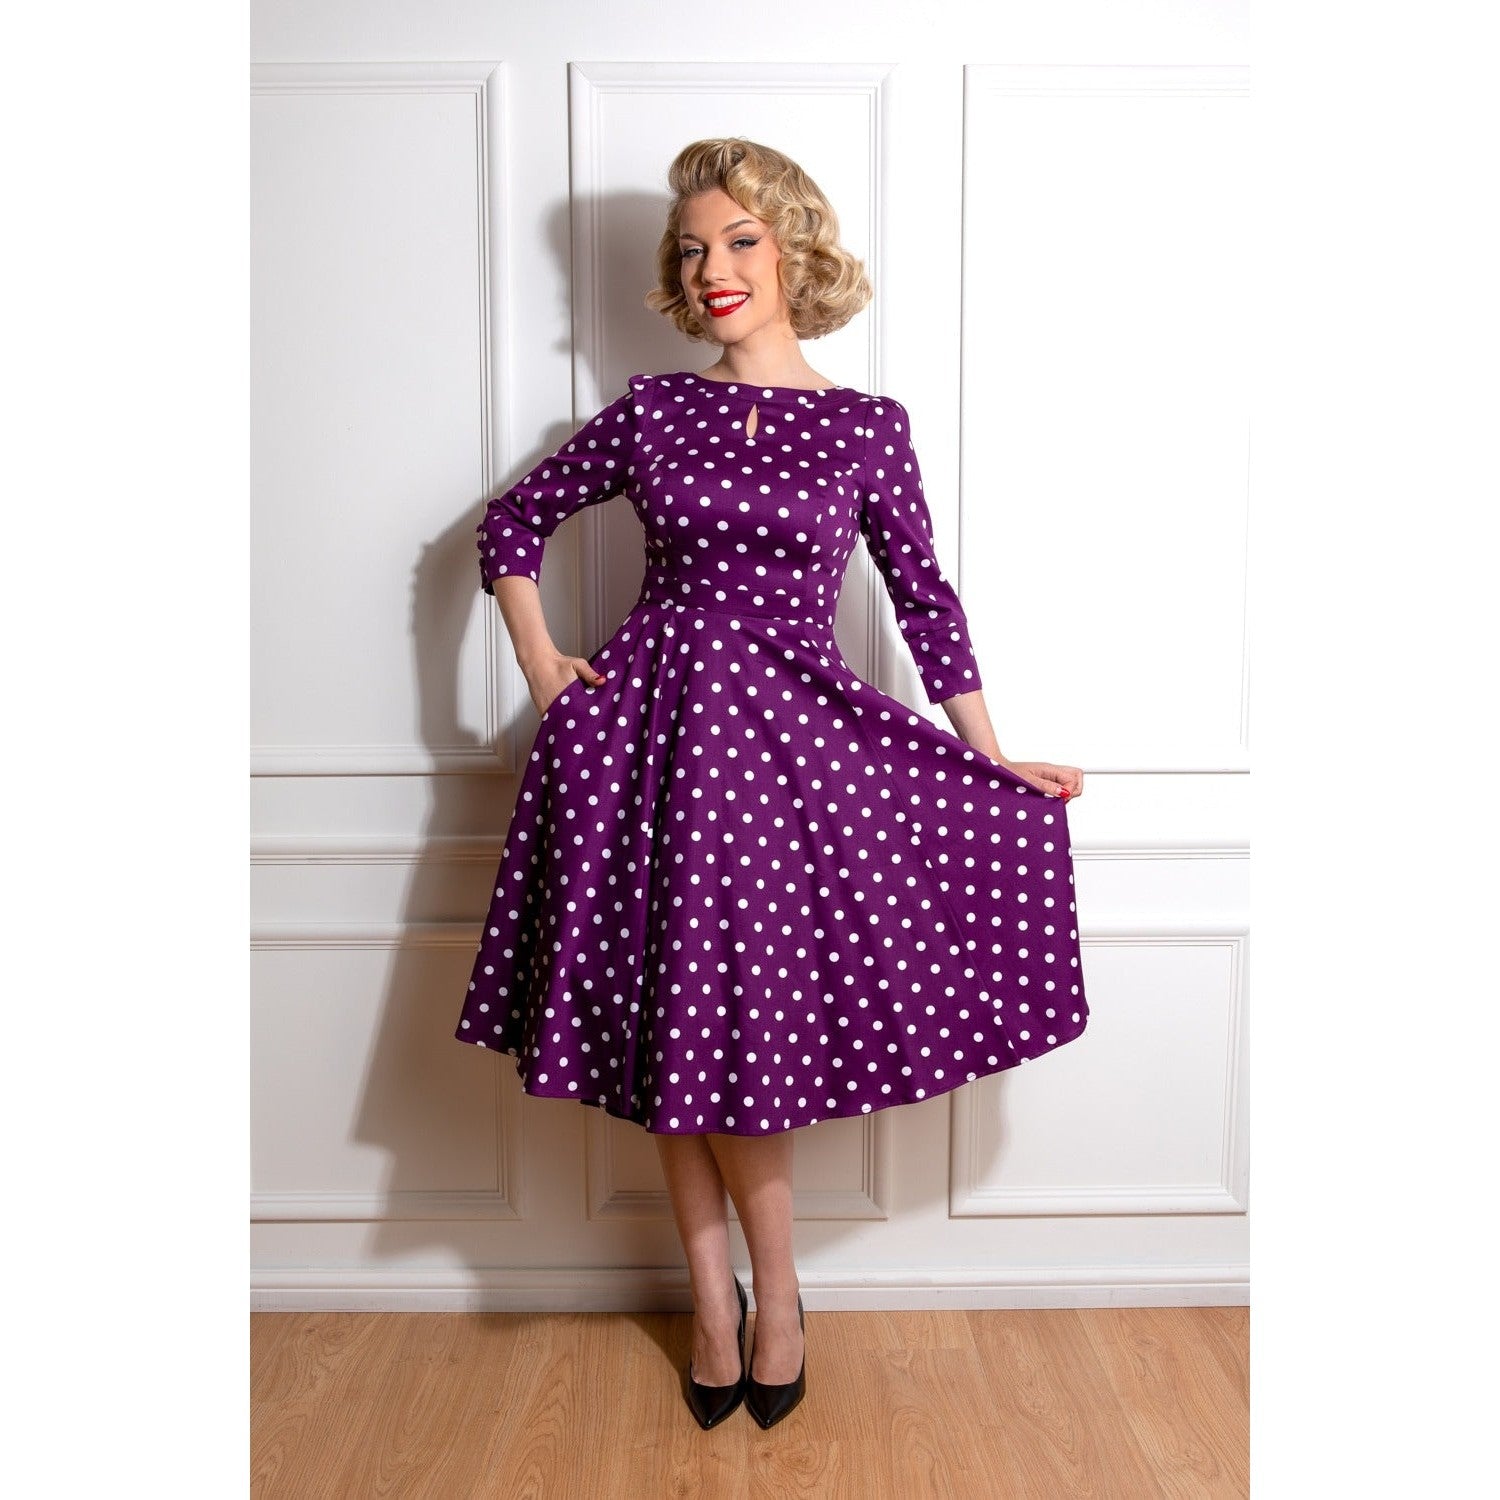 Little Kitty Girl's Purple And White Polka Dot Party Dress